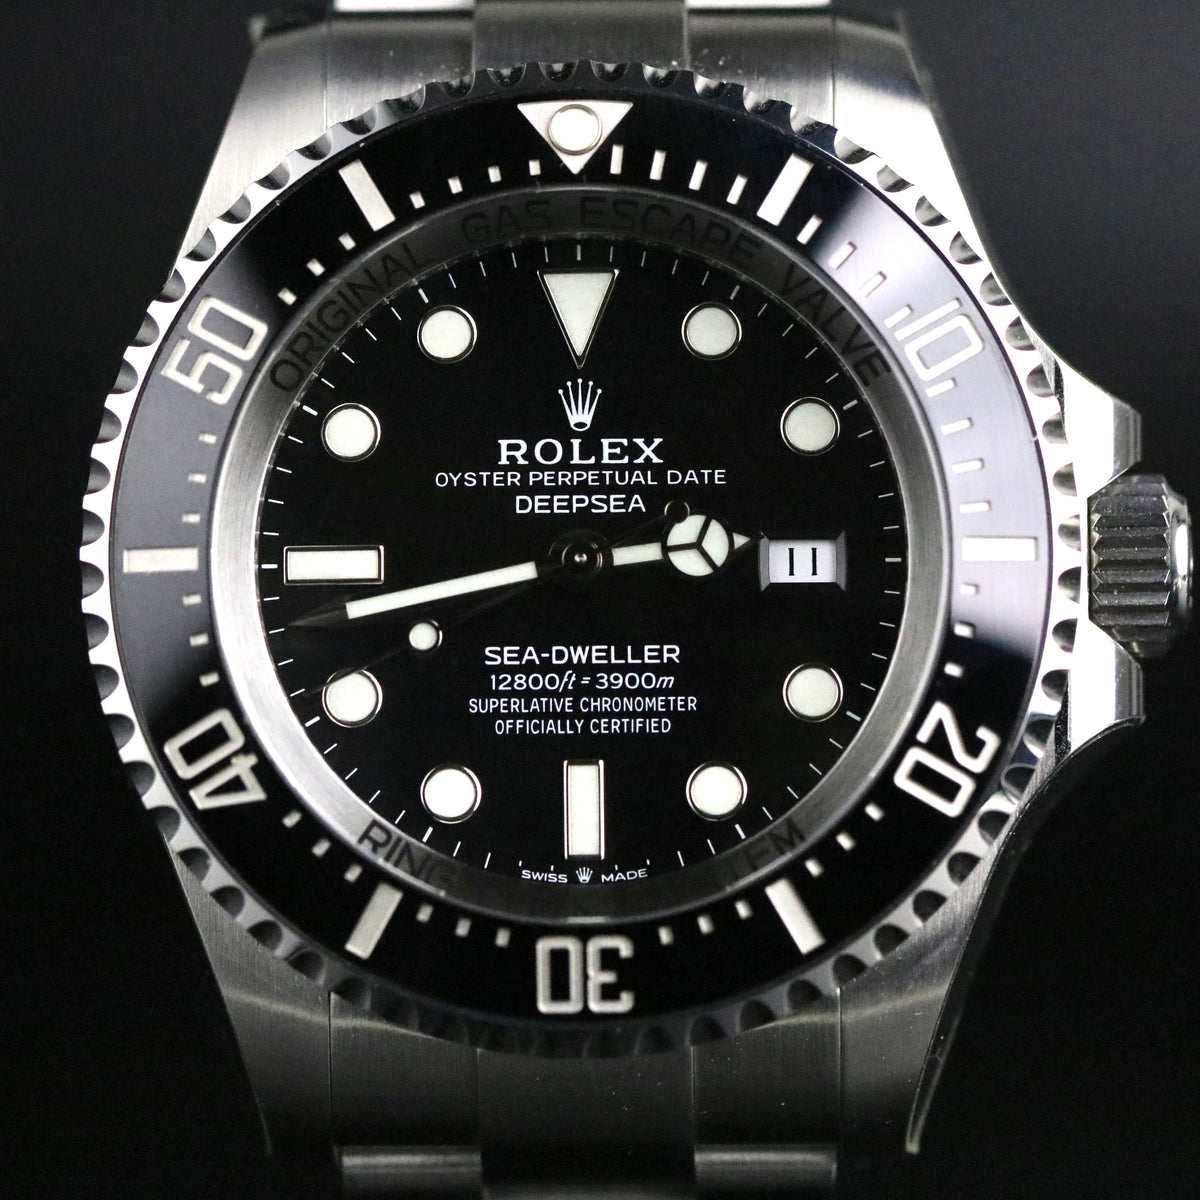 NOS 2018 Rolex 126660 Deepsea Full Sticker with Box & Papers